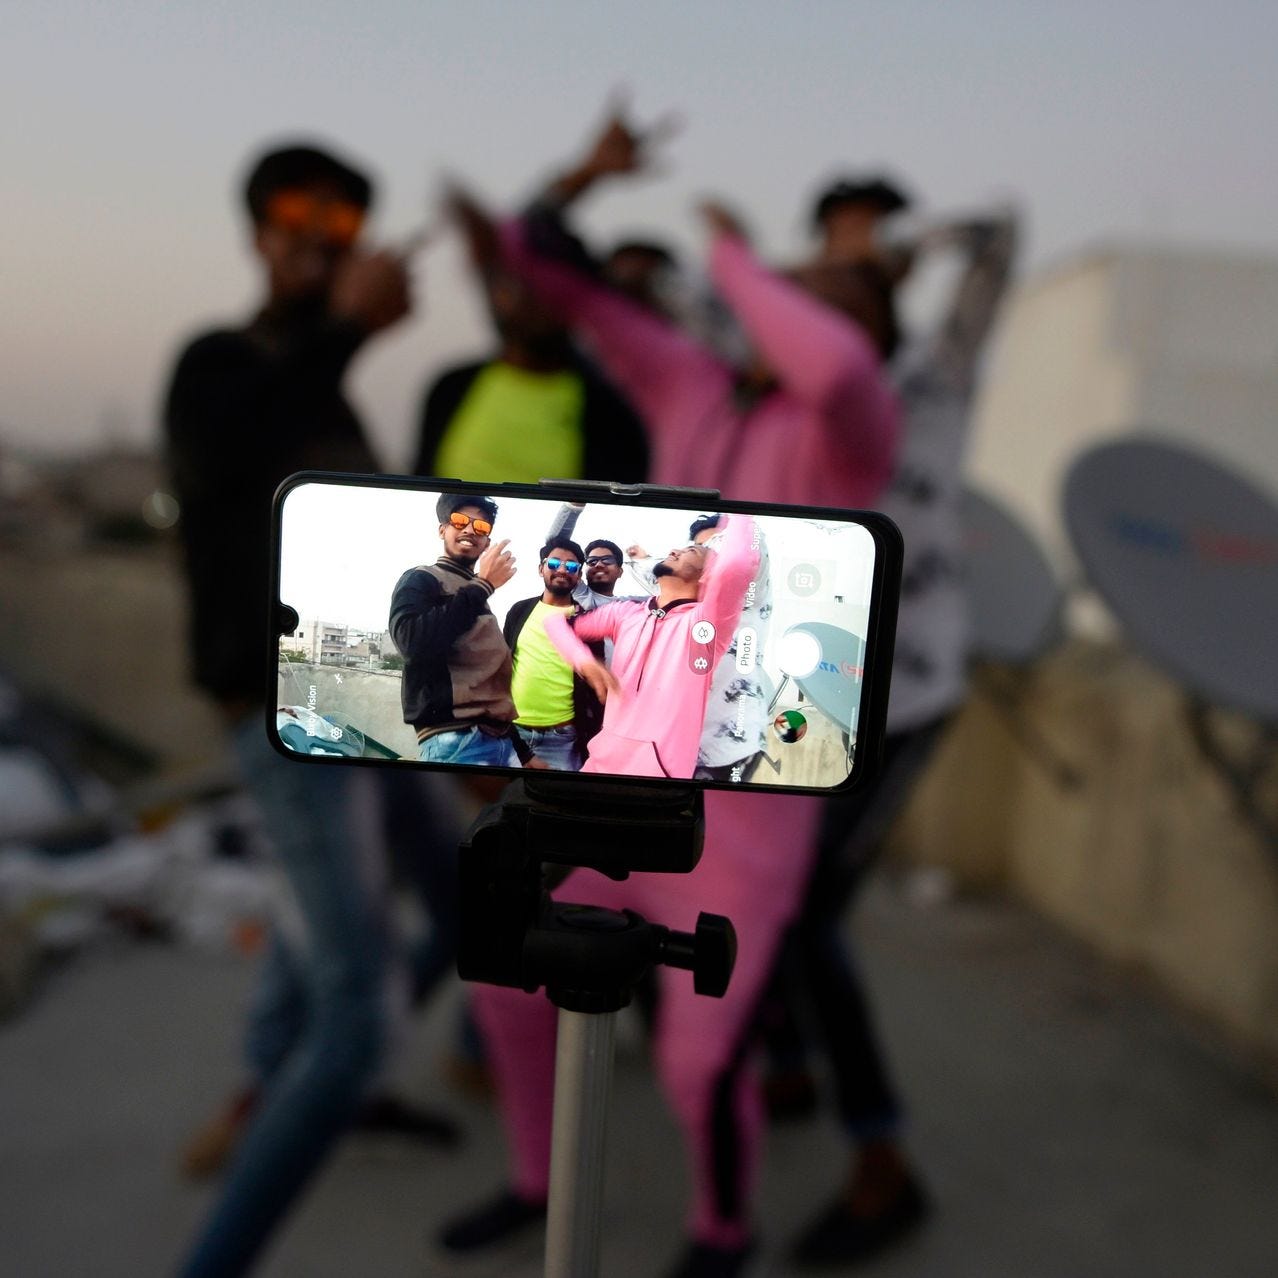 India banned TikTok in 2020, citing cybersecurity concerns.